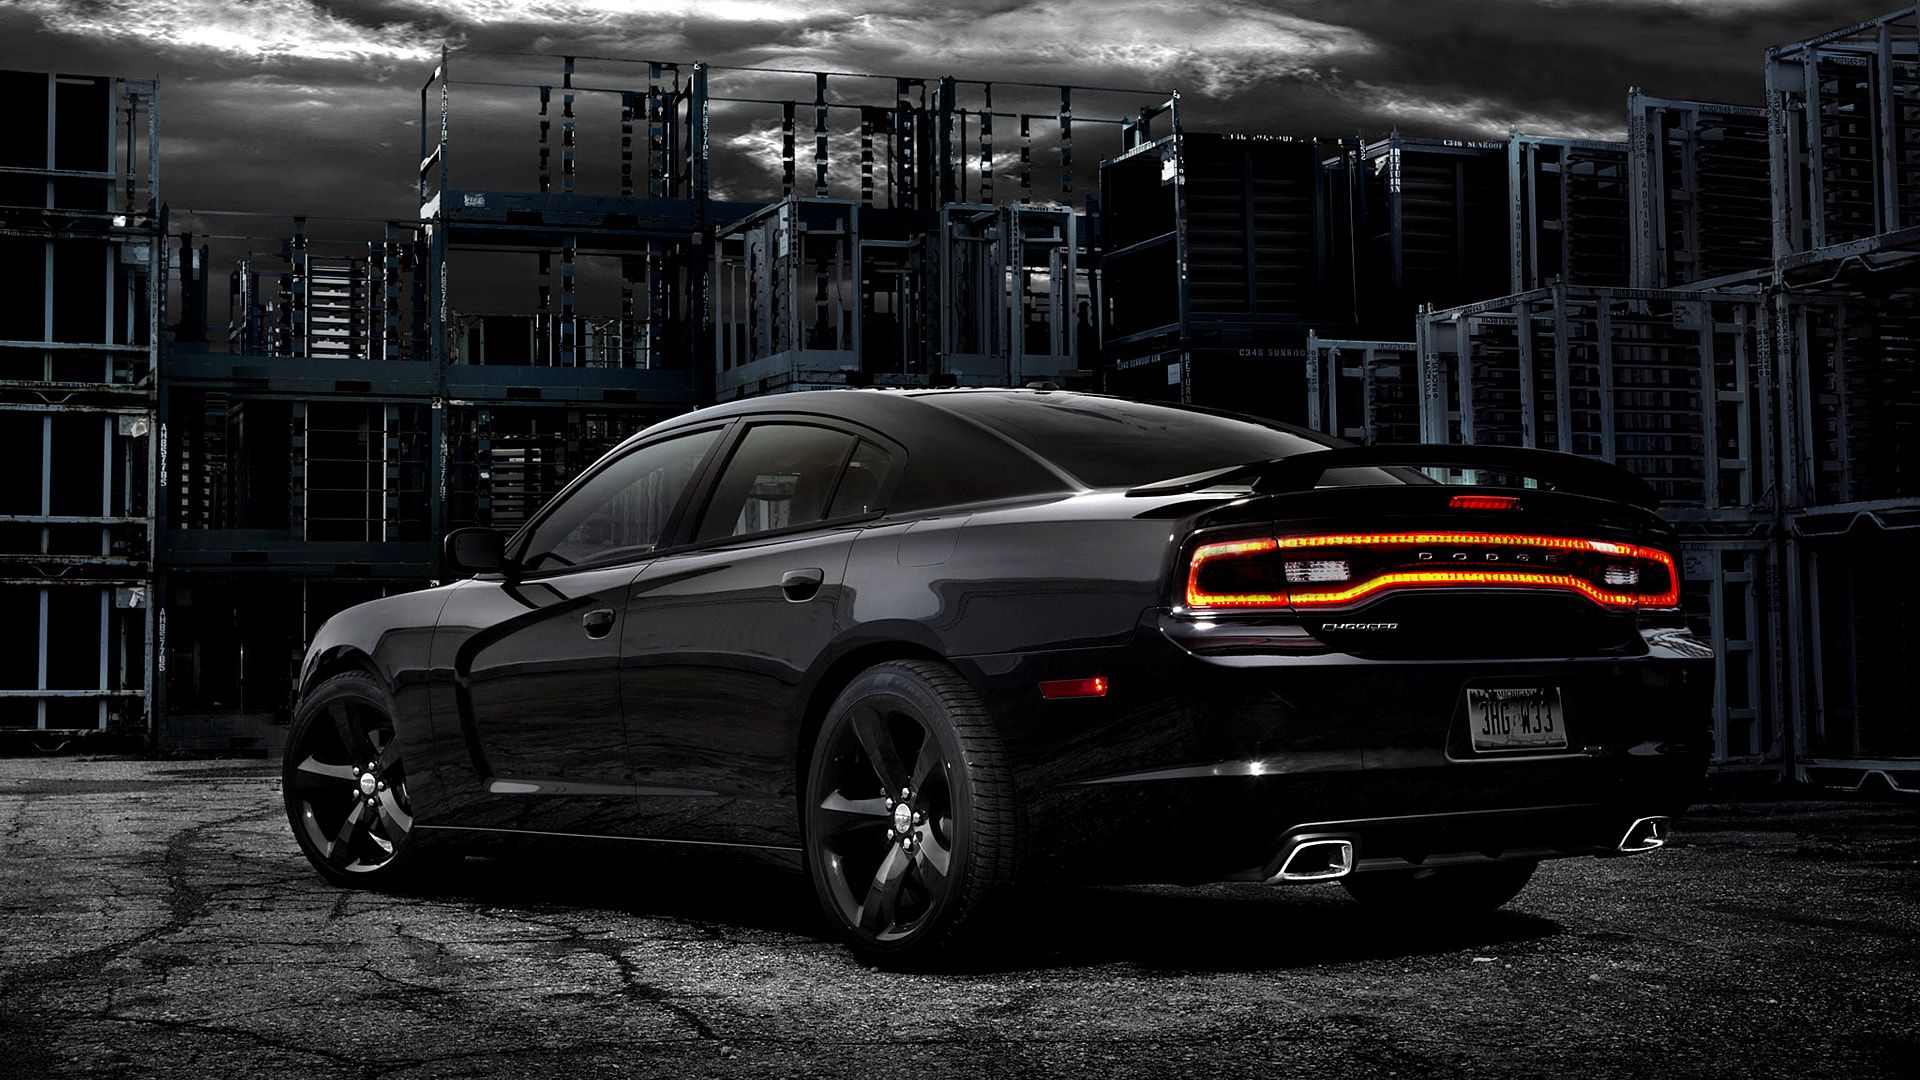 Luxurius Dodge Charger Wallpaper With Additional Car - 2011 Dodge Charger Ld John Wick - HD Wallpaper 